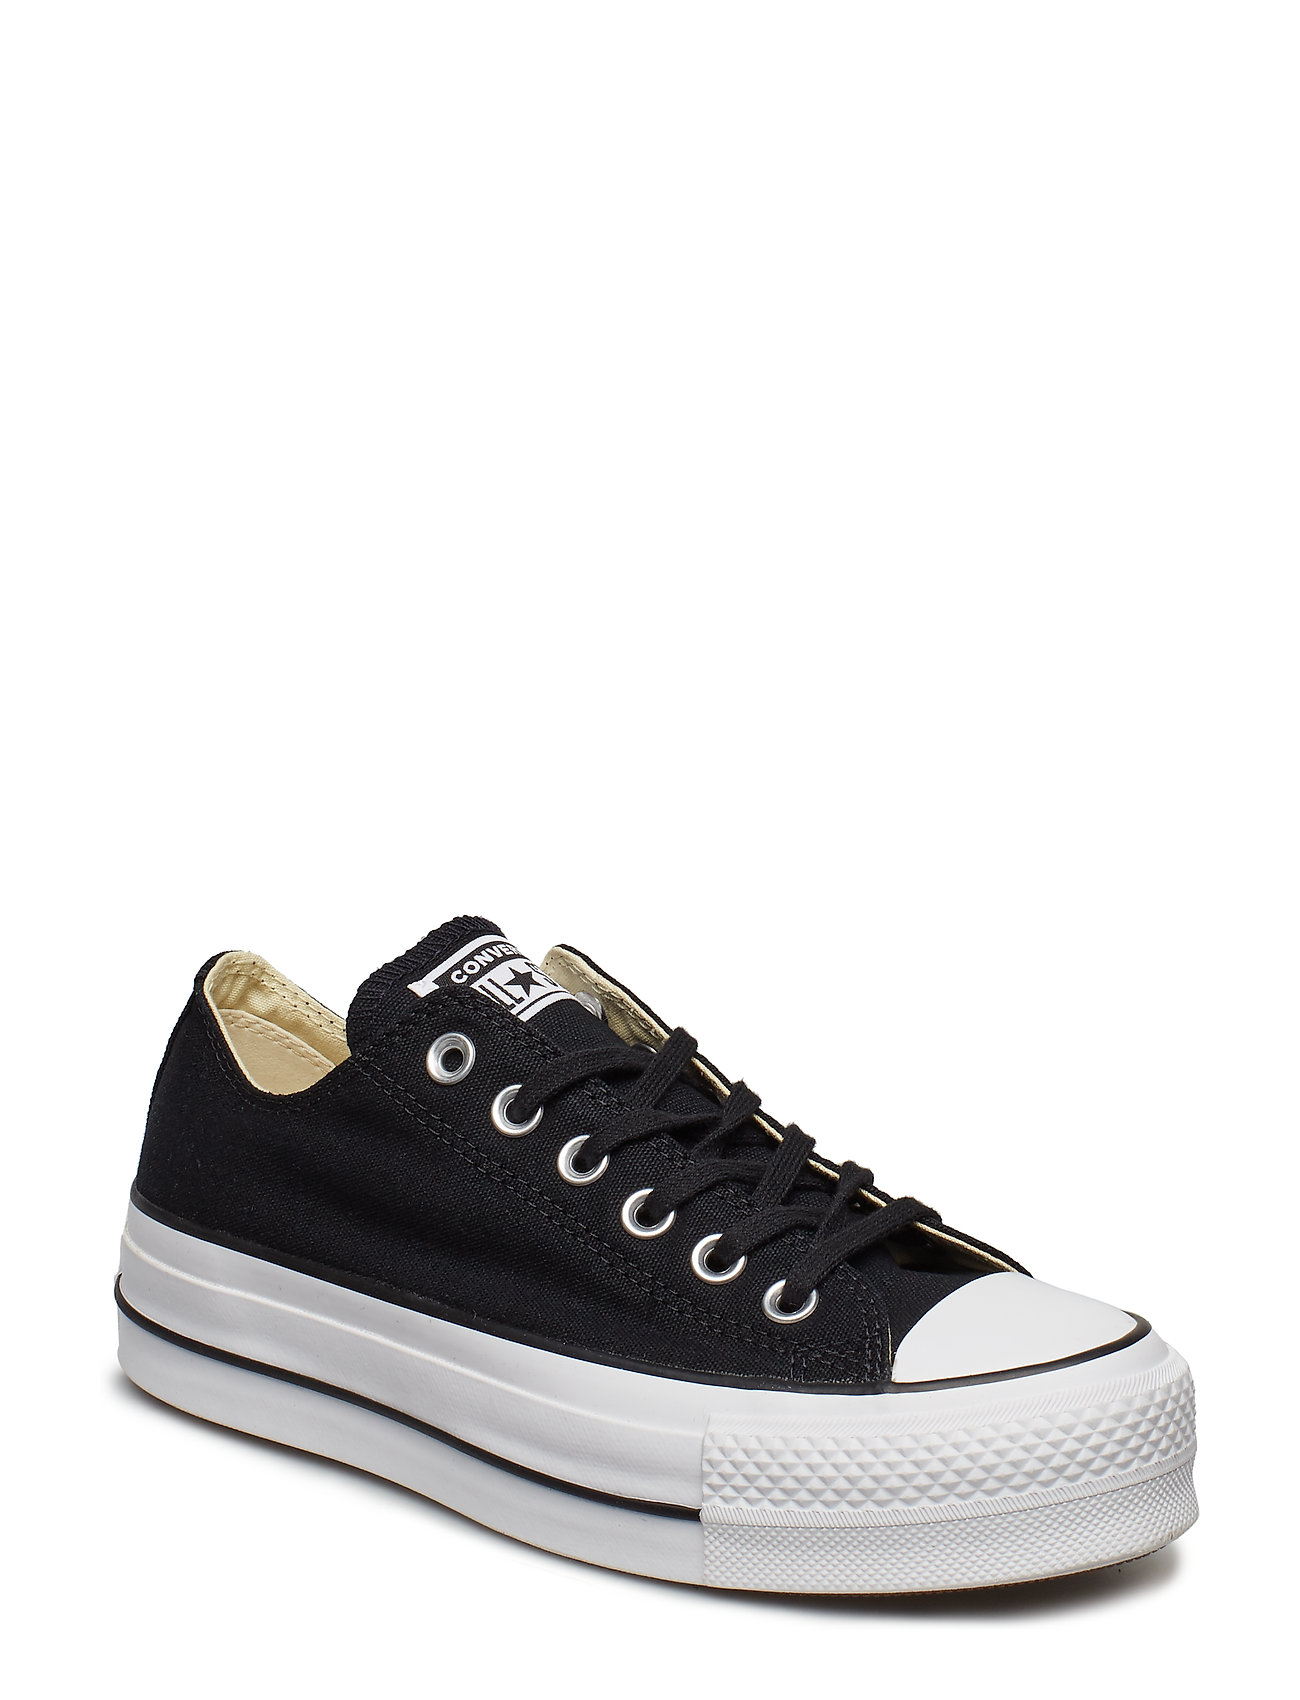 Converse "Chuck Taylor All Star Lift Low-top Sneakers Black Converse"